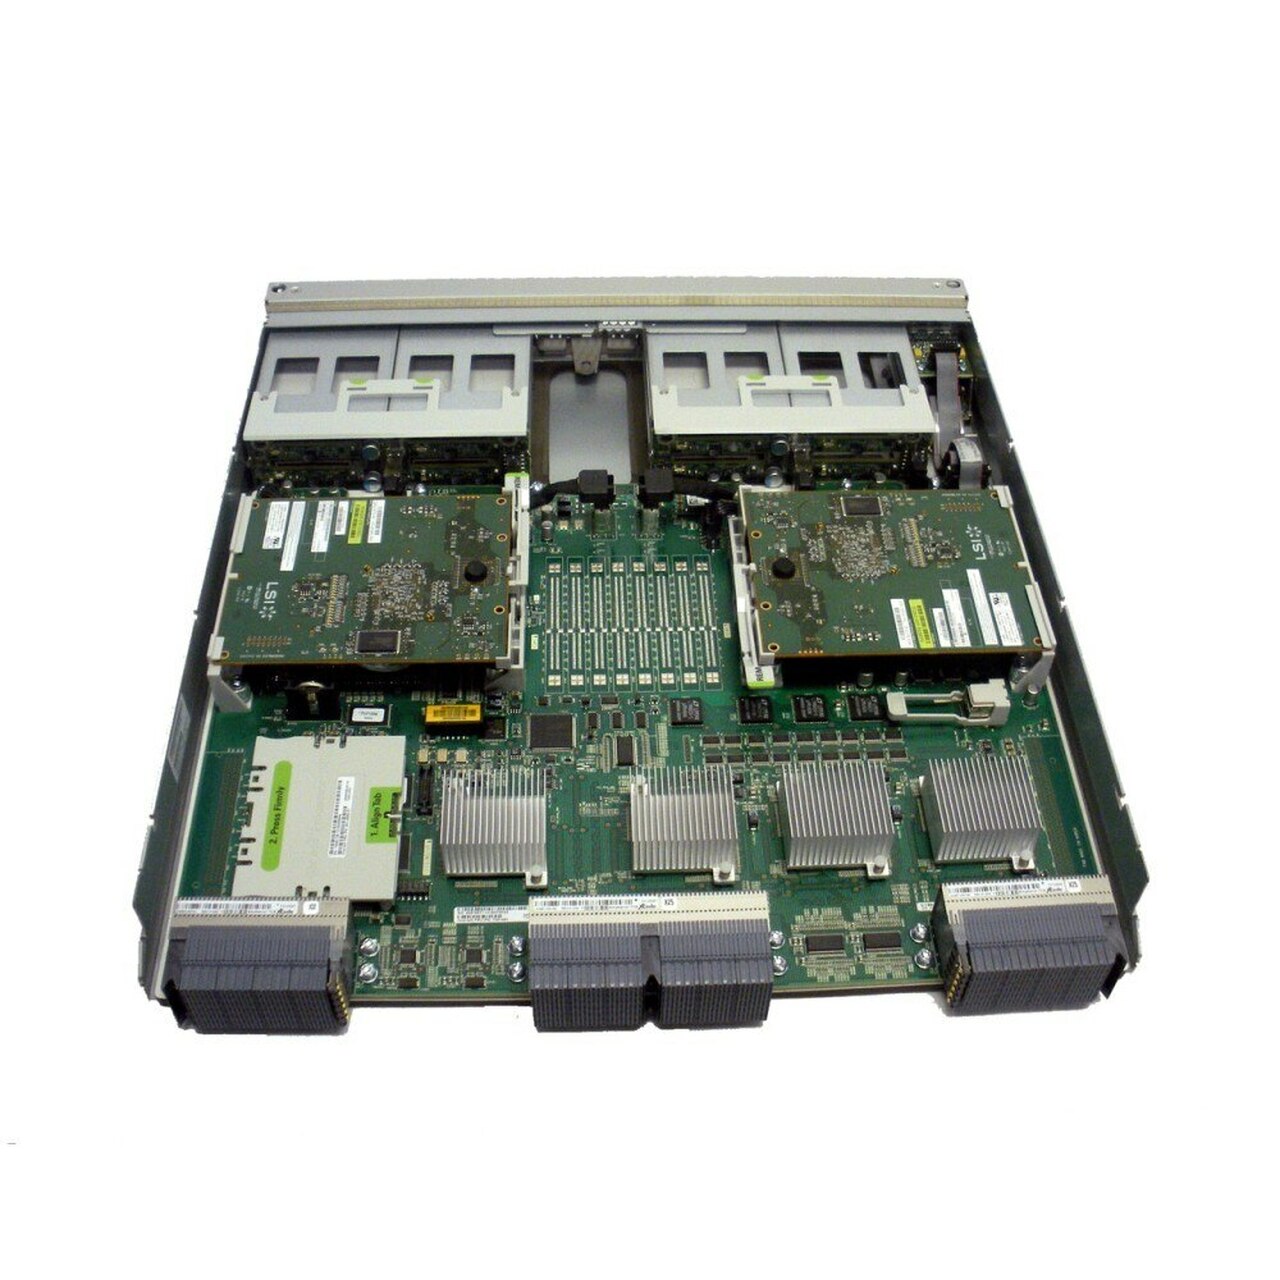 Save on refurbished Oracle Sun SPARC T4-4 server spare parts from your trusted partners at Flagship Technologies. Browse our revolving inventory of refurbished Oracle Sun server equipment online and get the best deals to maintain or upgrade your IT project or data center.